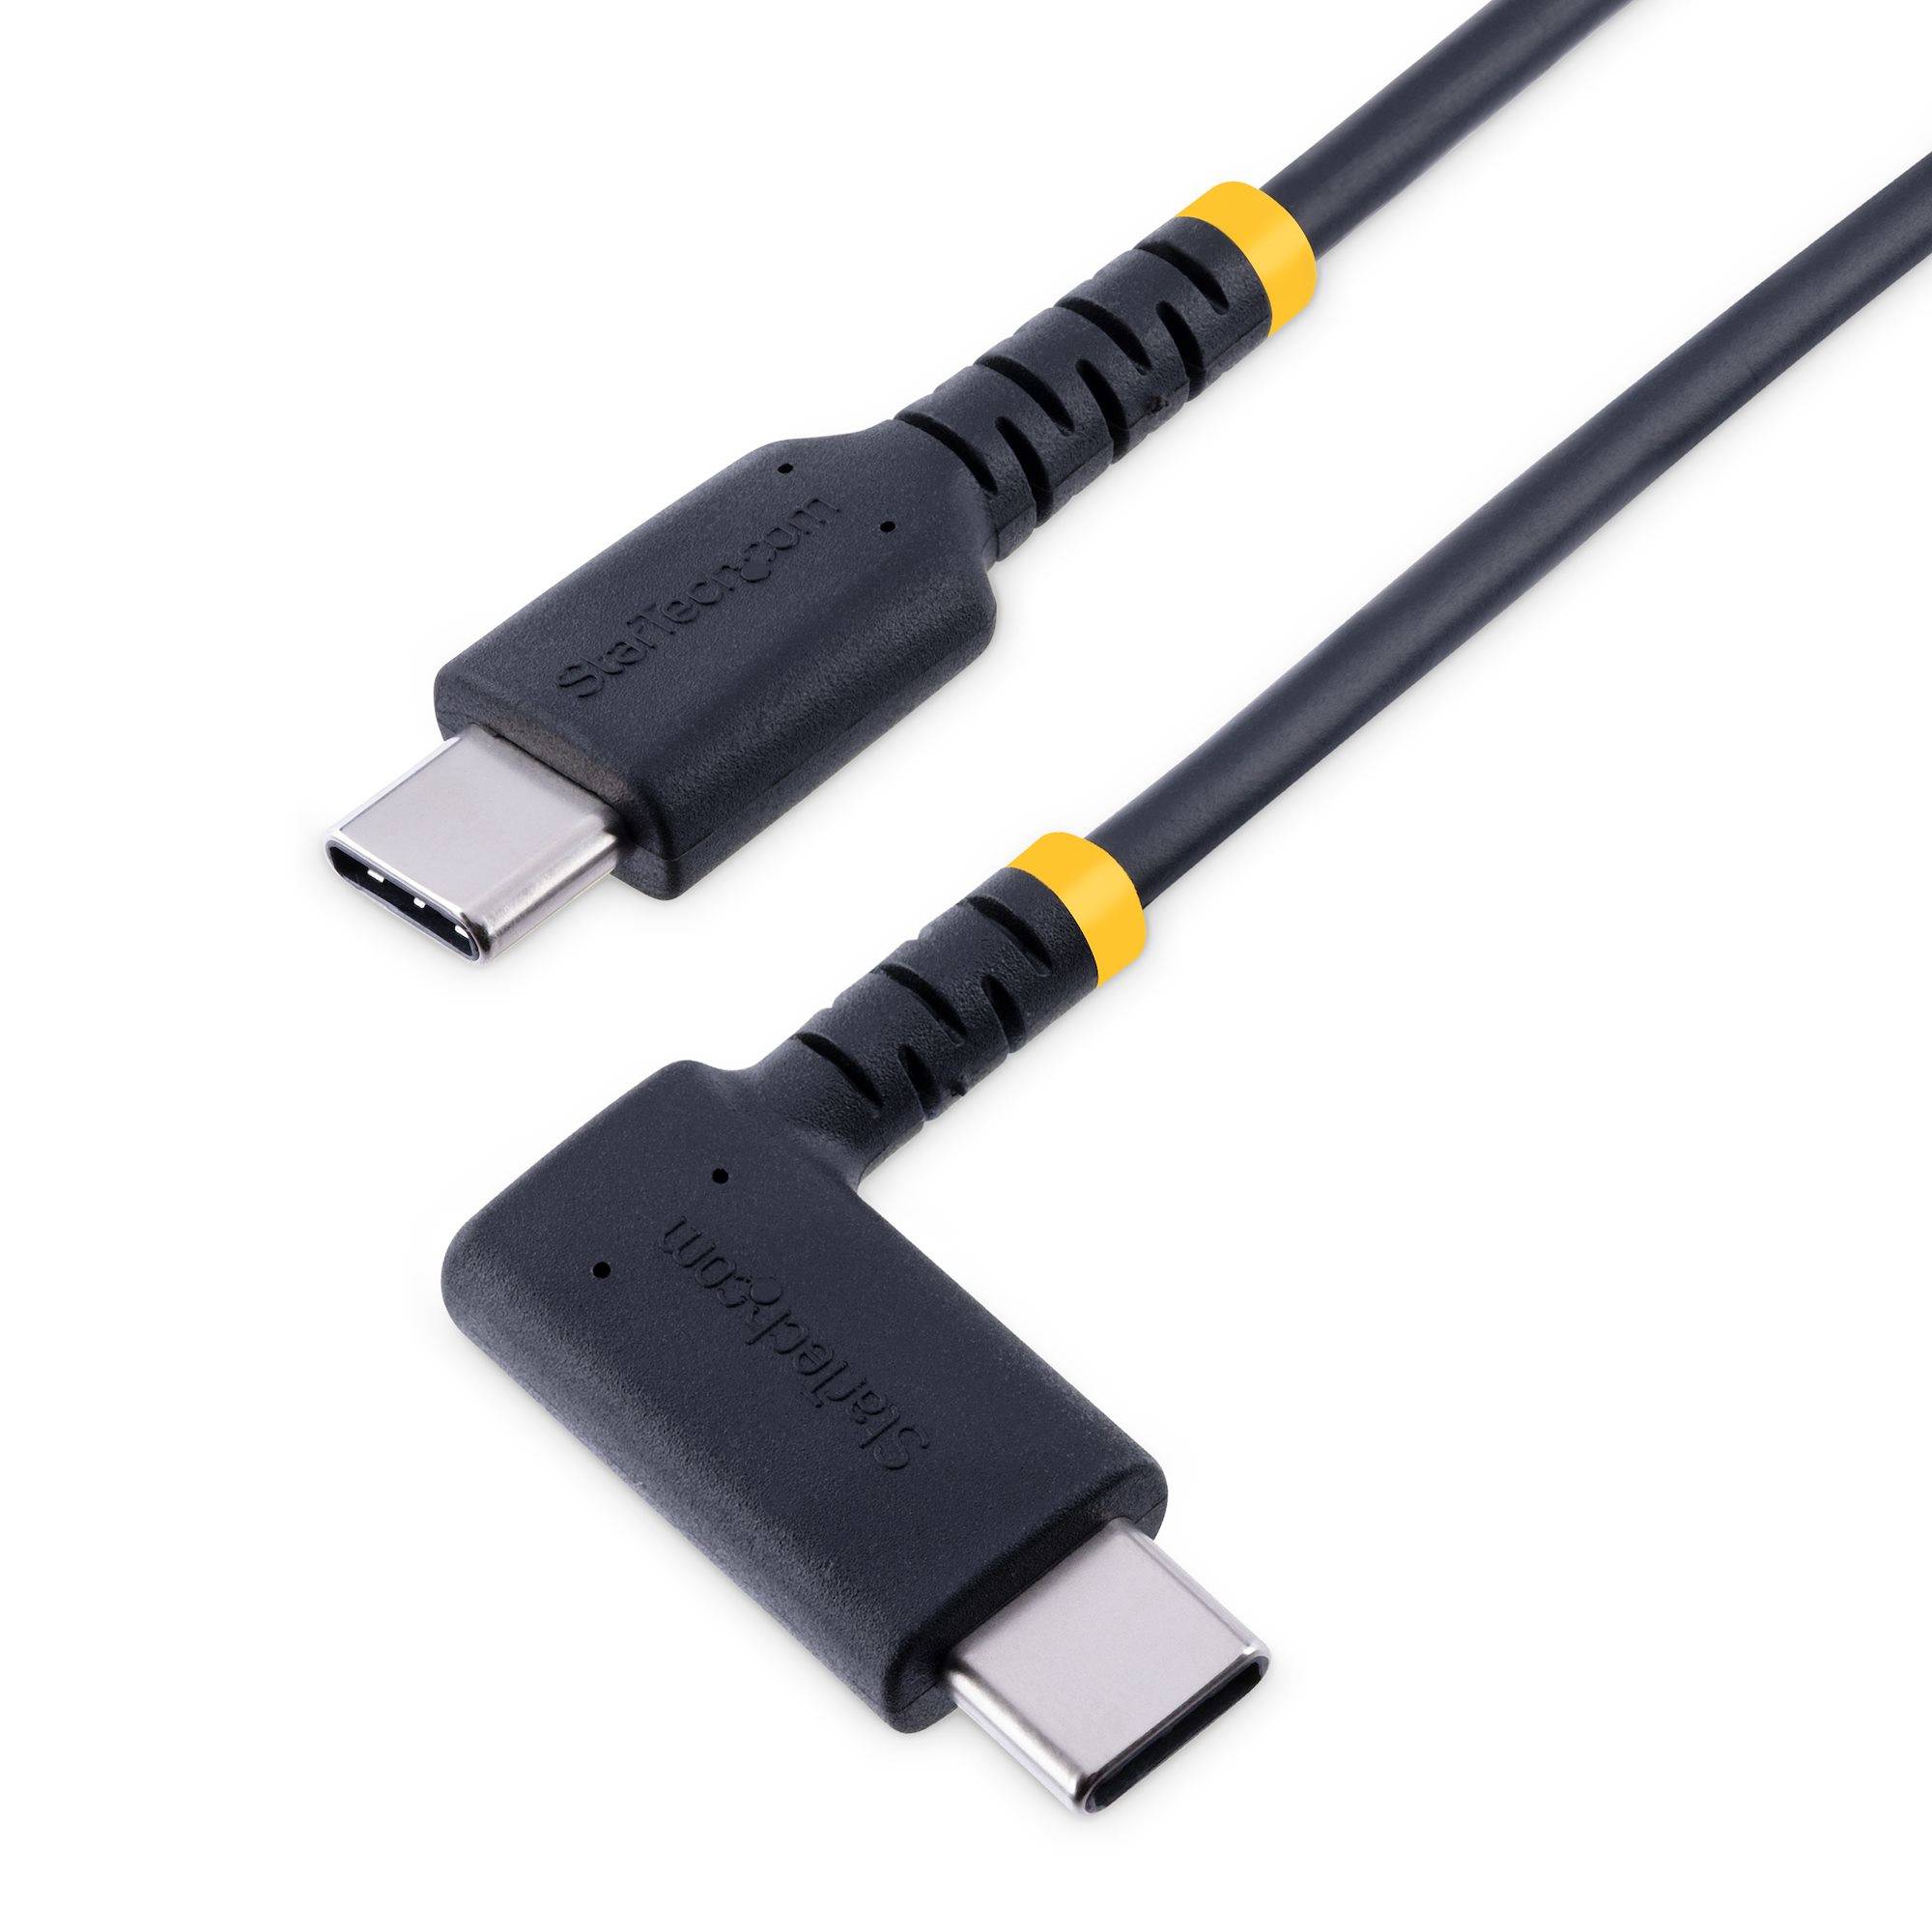 Rca Informatique - Image du produit : 1MUSB-C CHARGING CABLE FAST CHARGE - RIGHT ANGLE USBC CABLE